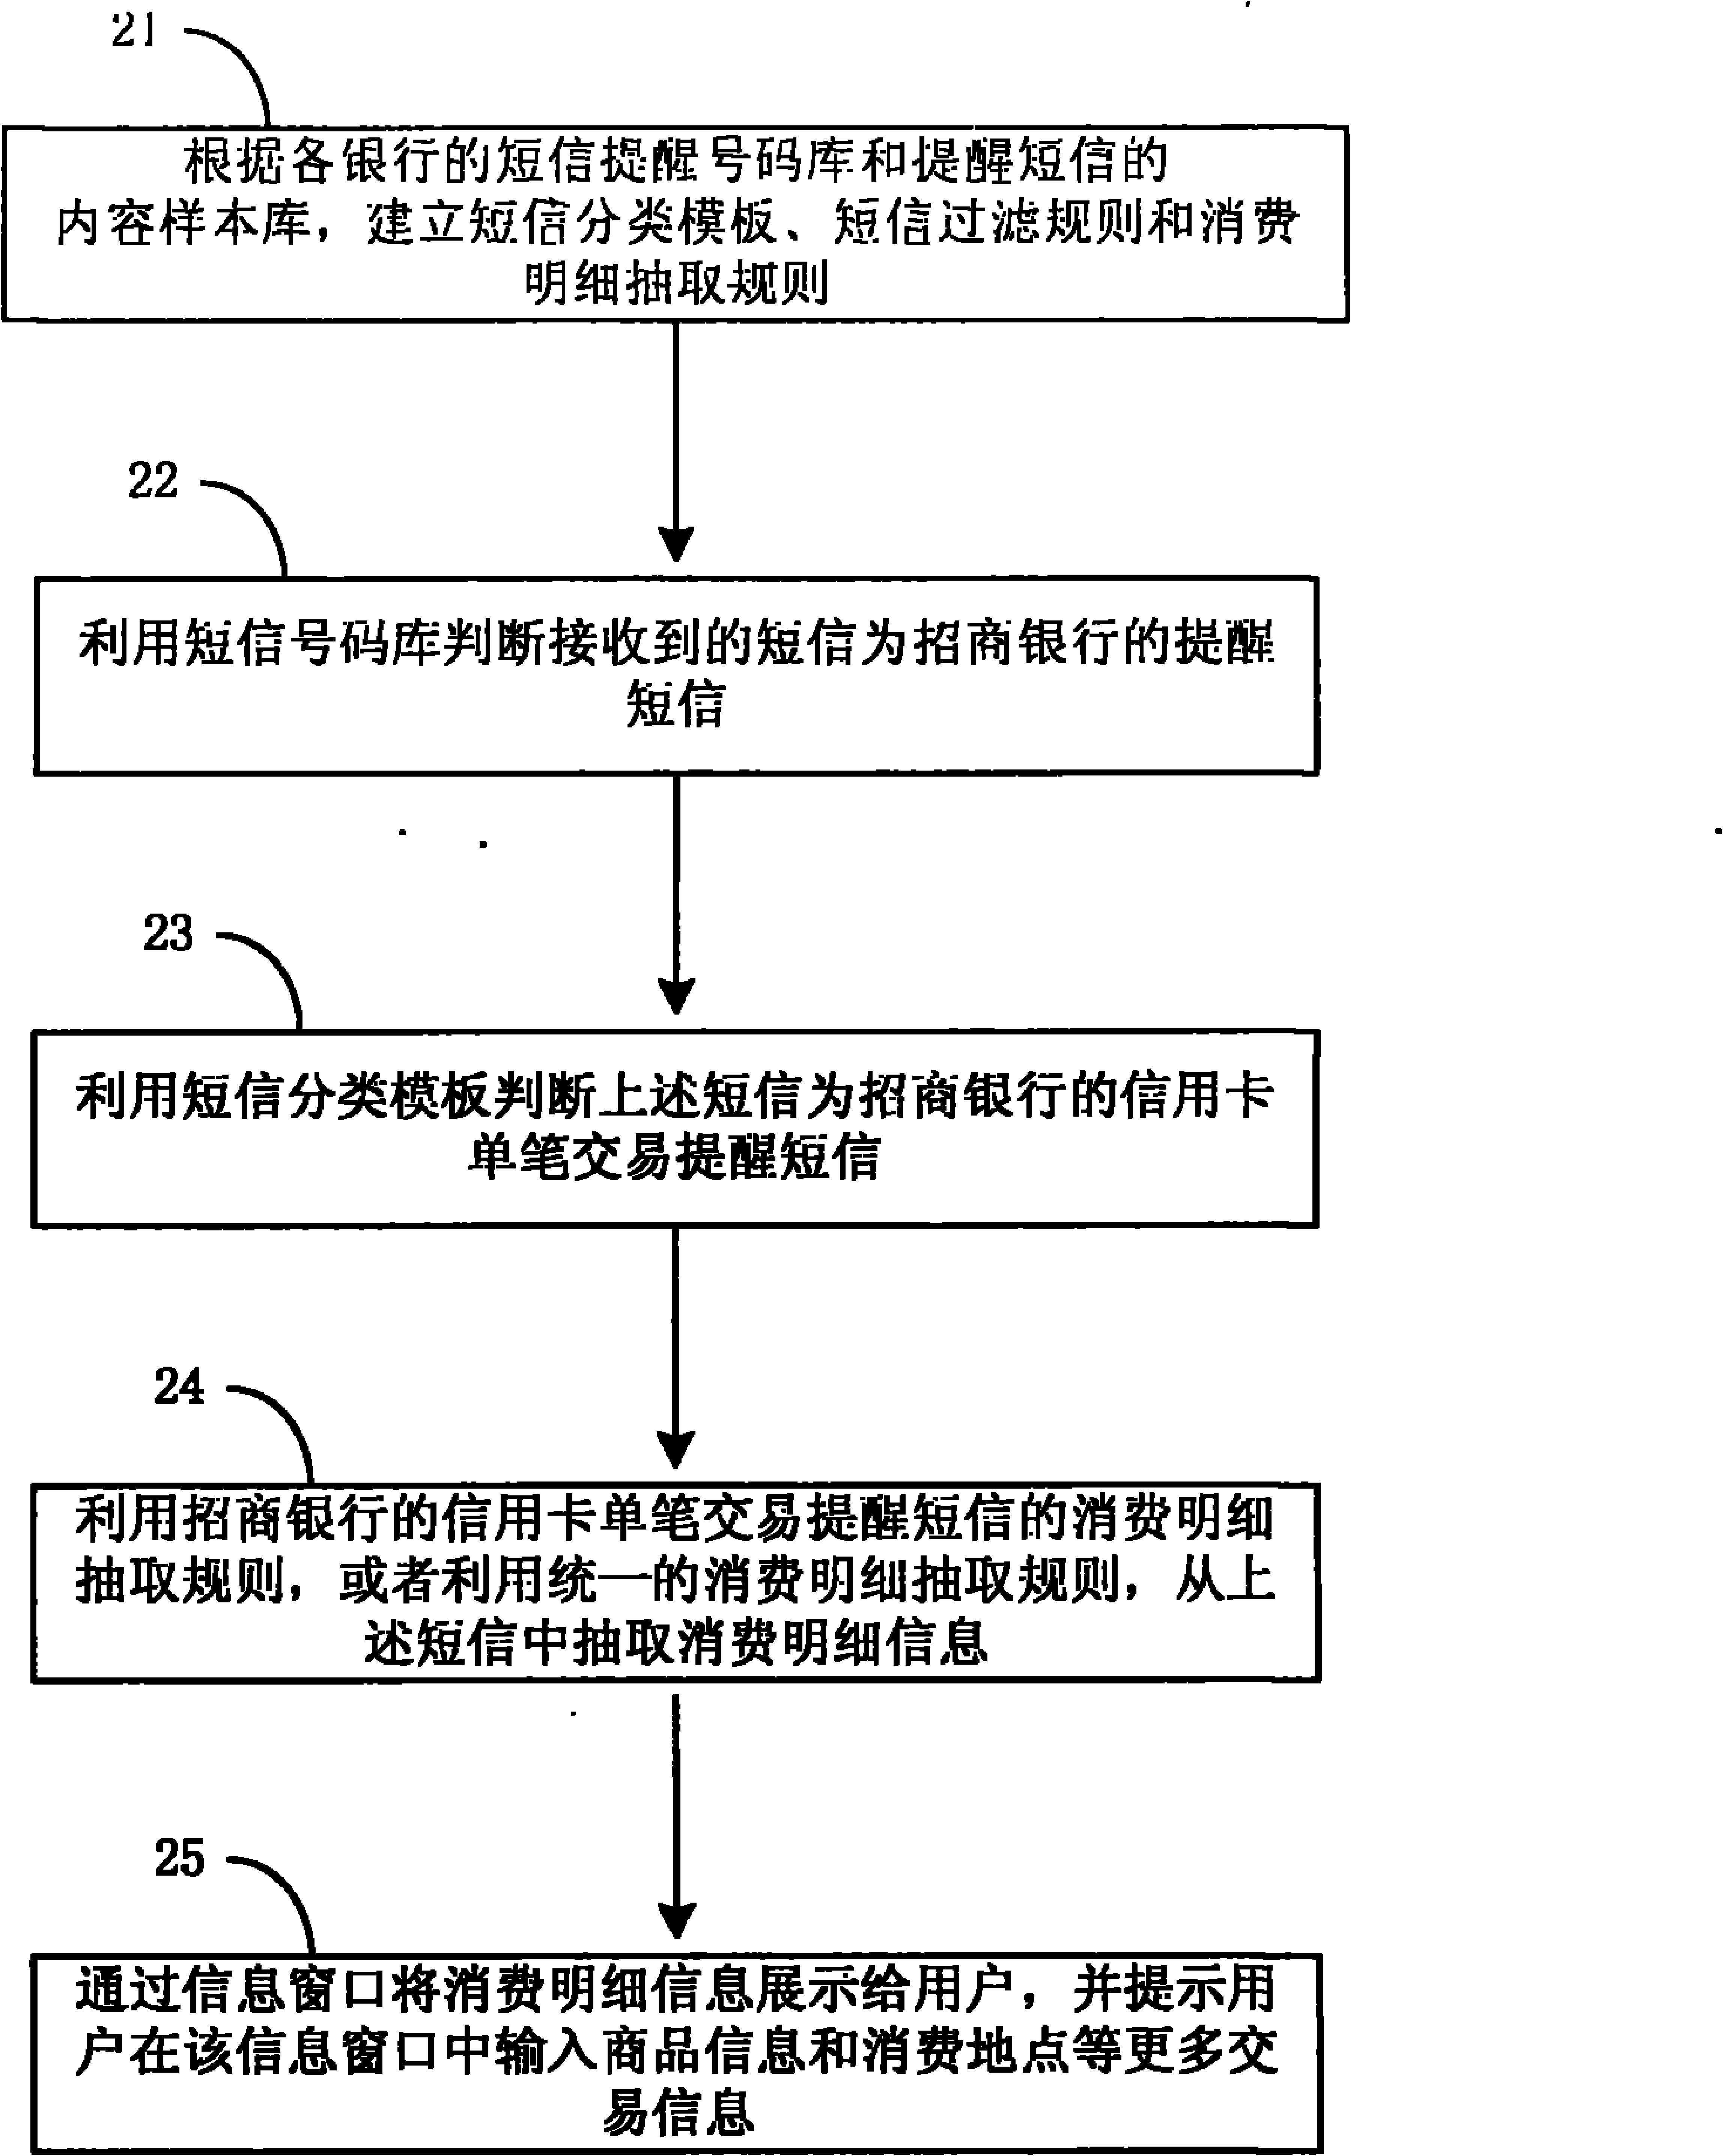 Method and device for managing consumption details of user